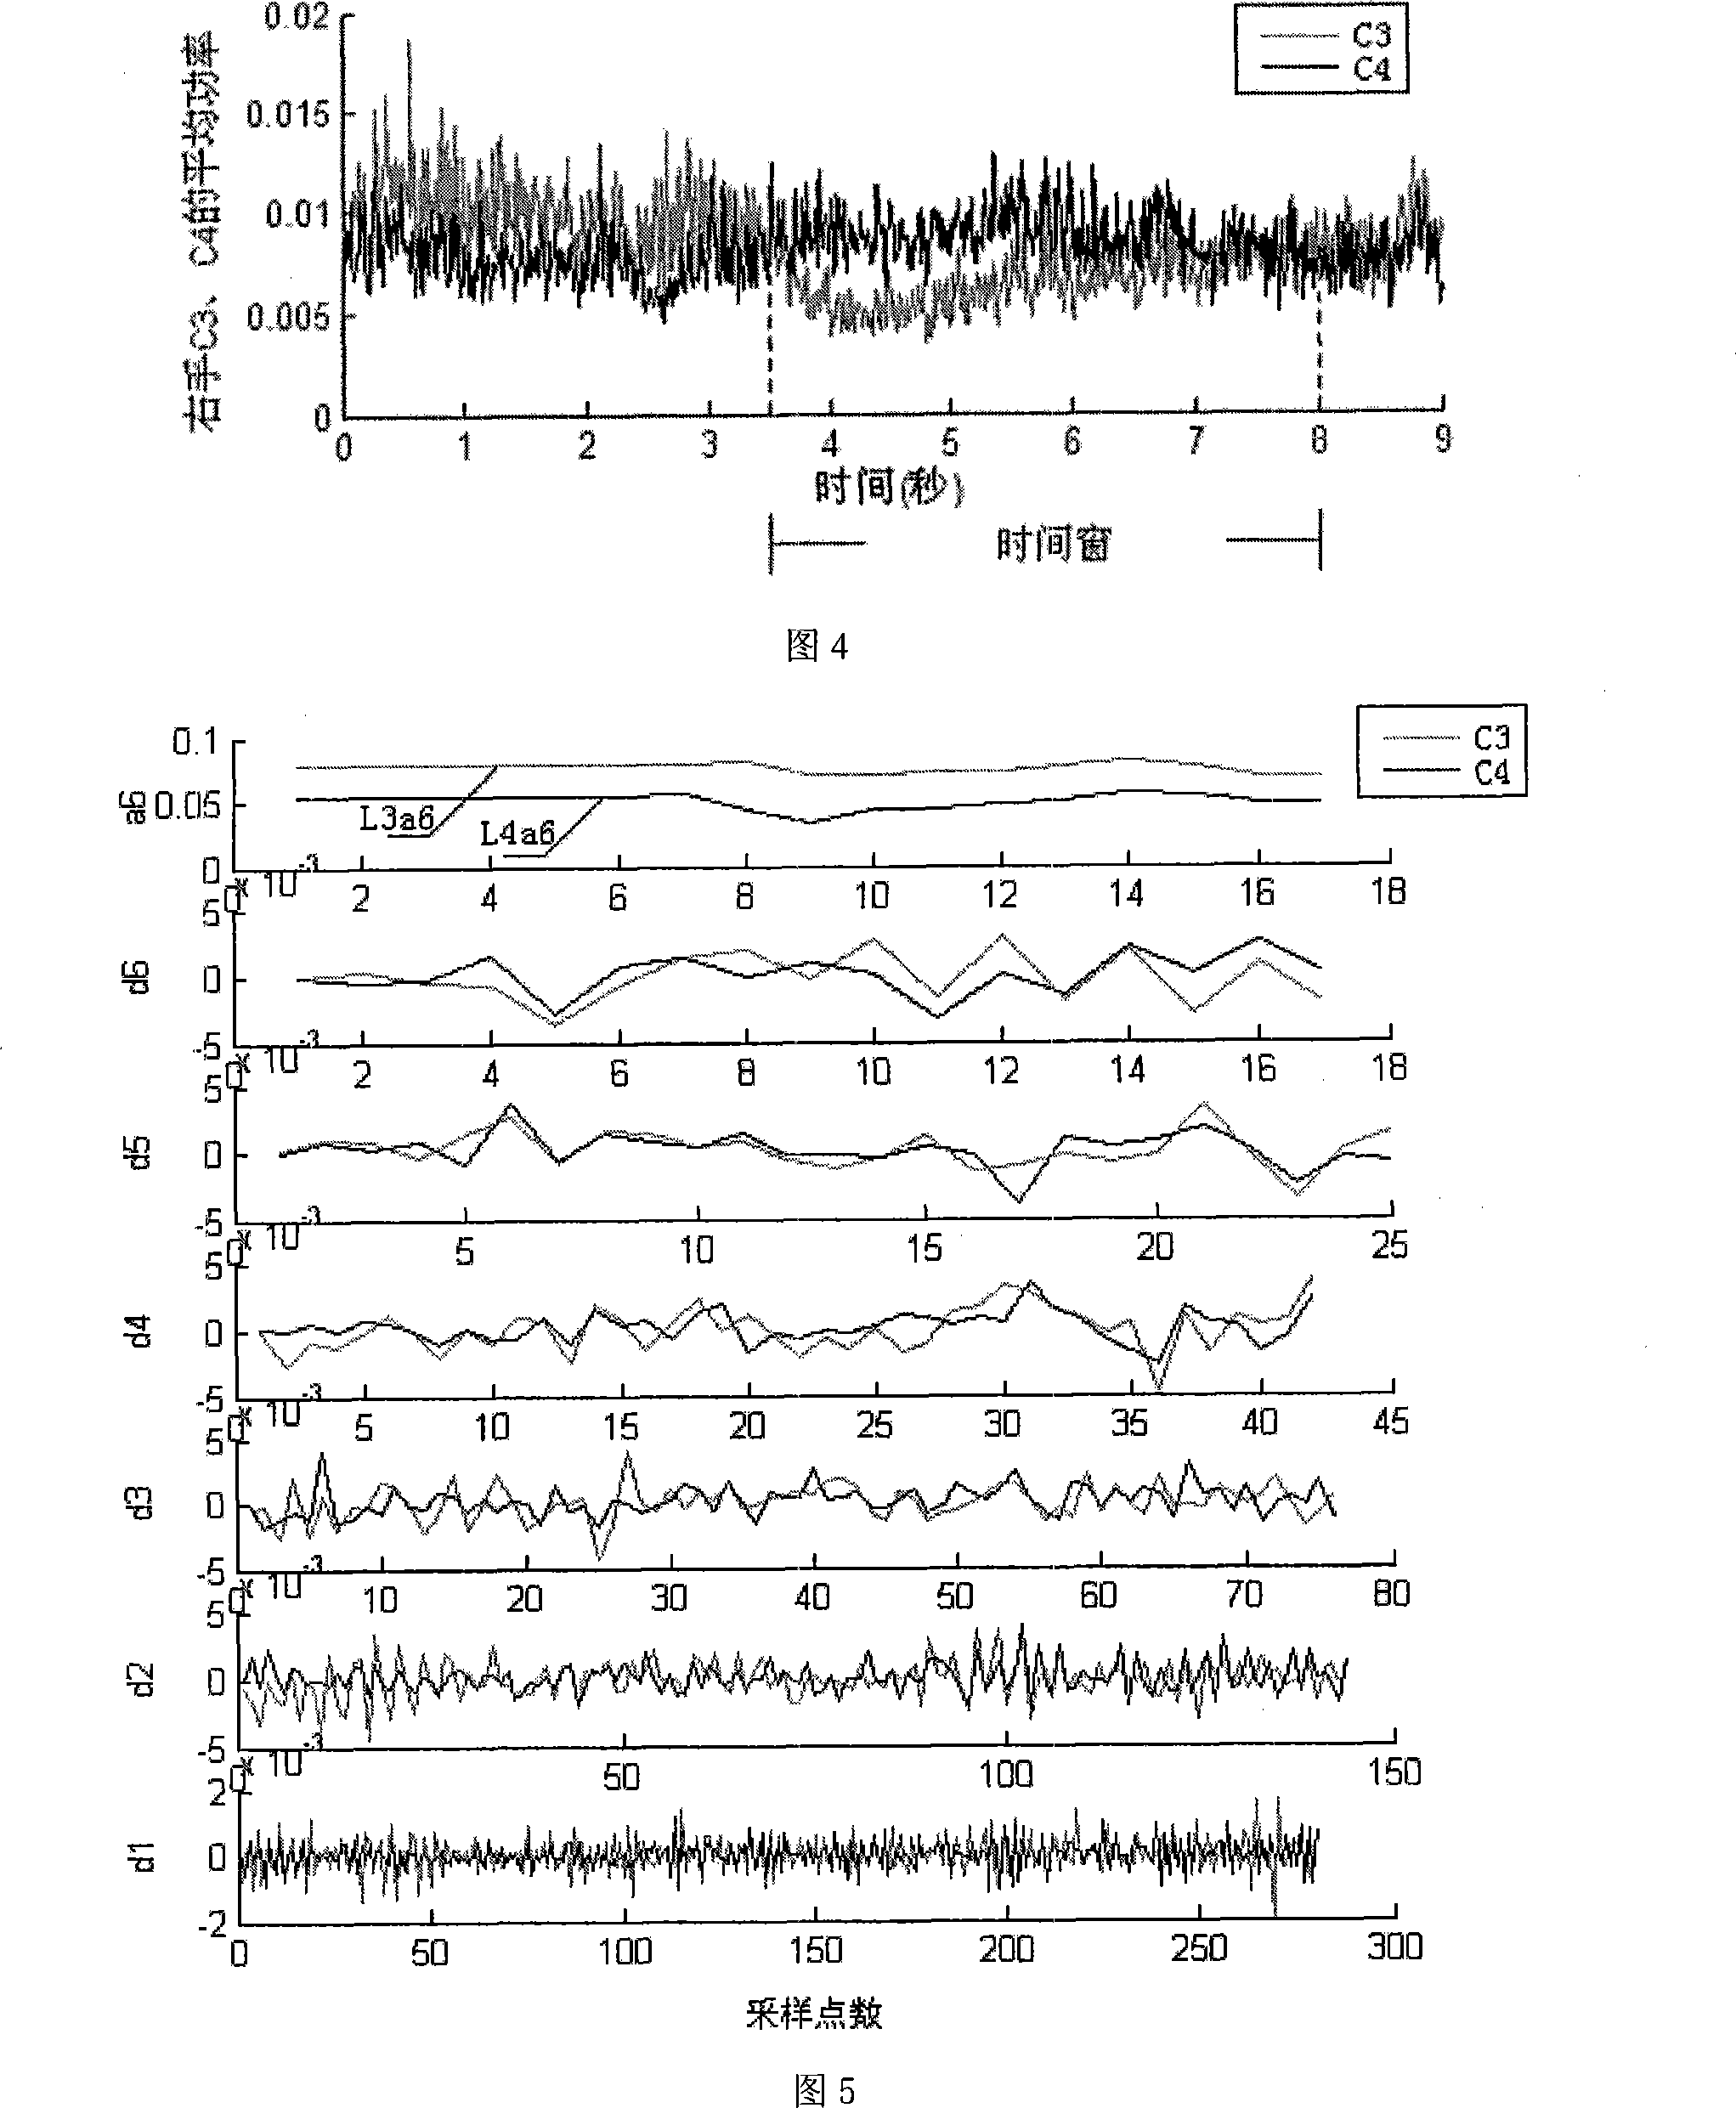 Brain wave characteristic extraction method based on wavelet translation and BP neural network